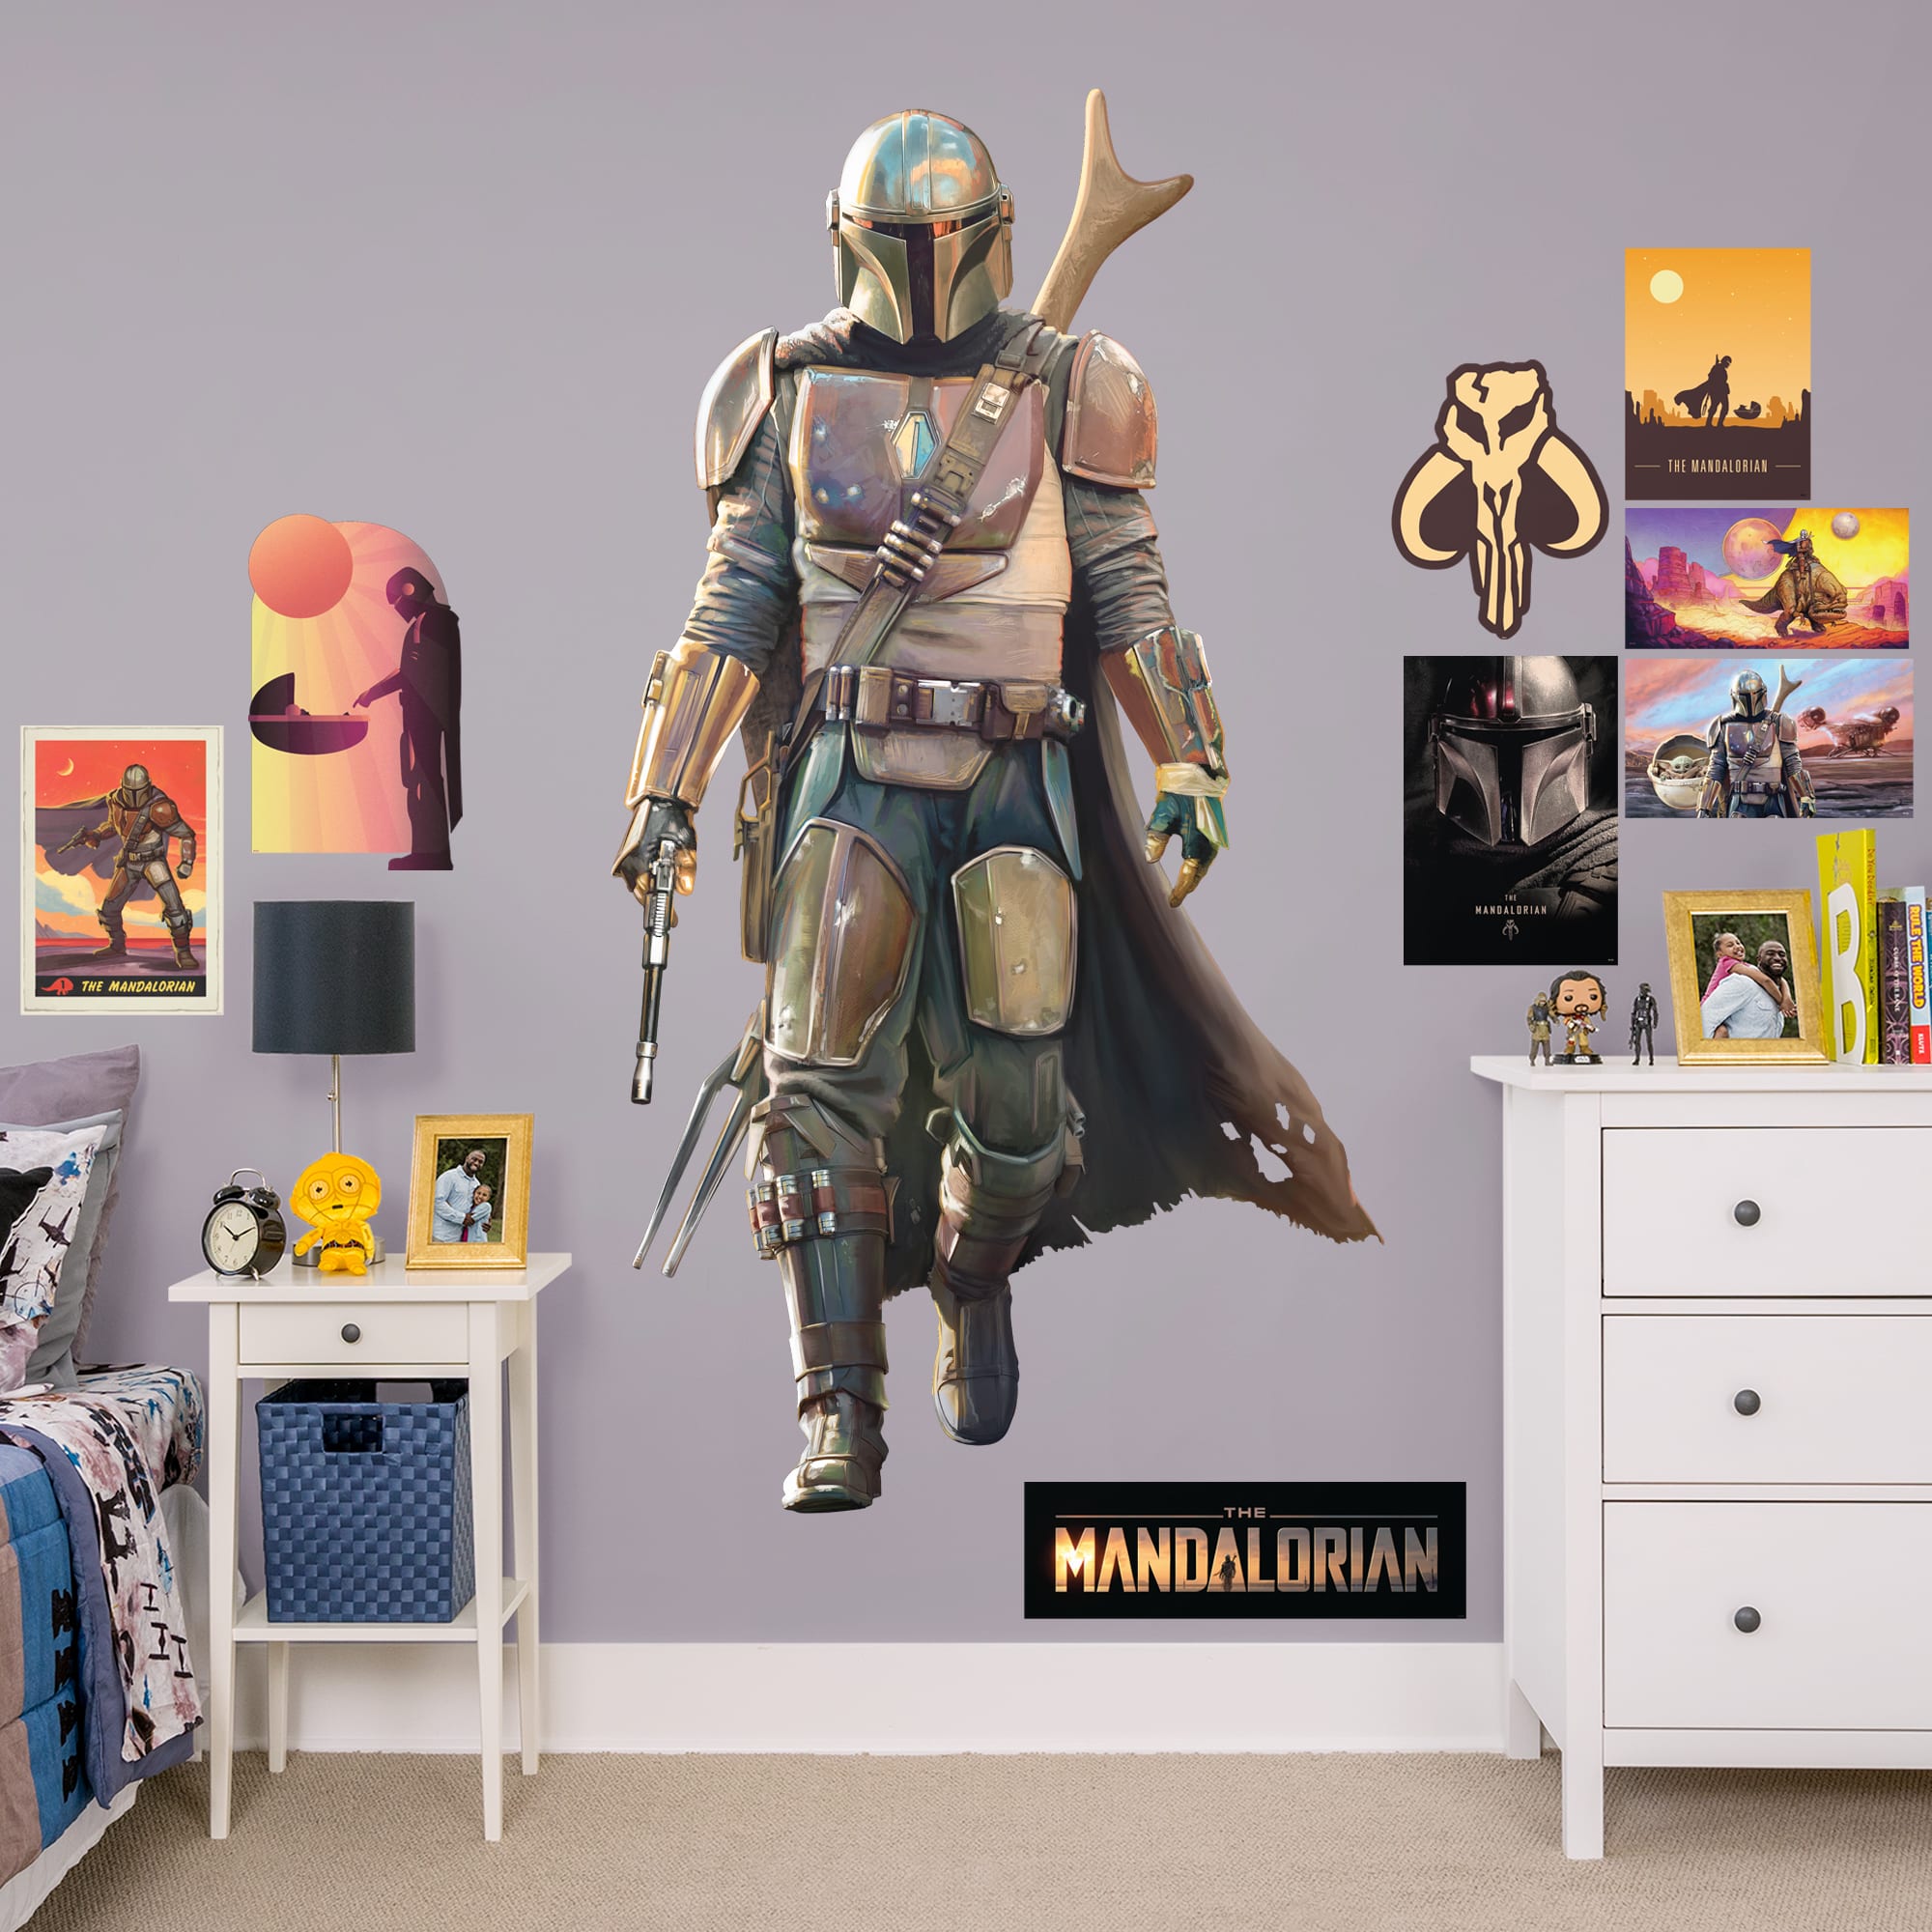 The Mandalorian - Star Wars: The Mandalorian - Officially Licensed Removable Wall Decal Life-Size Character + 10 Decals (42.5"W